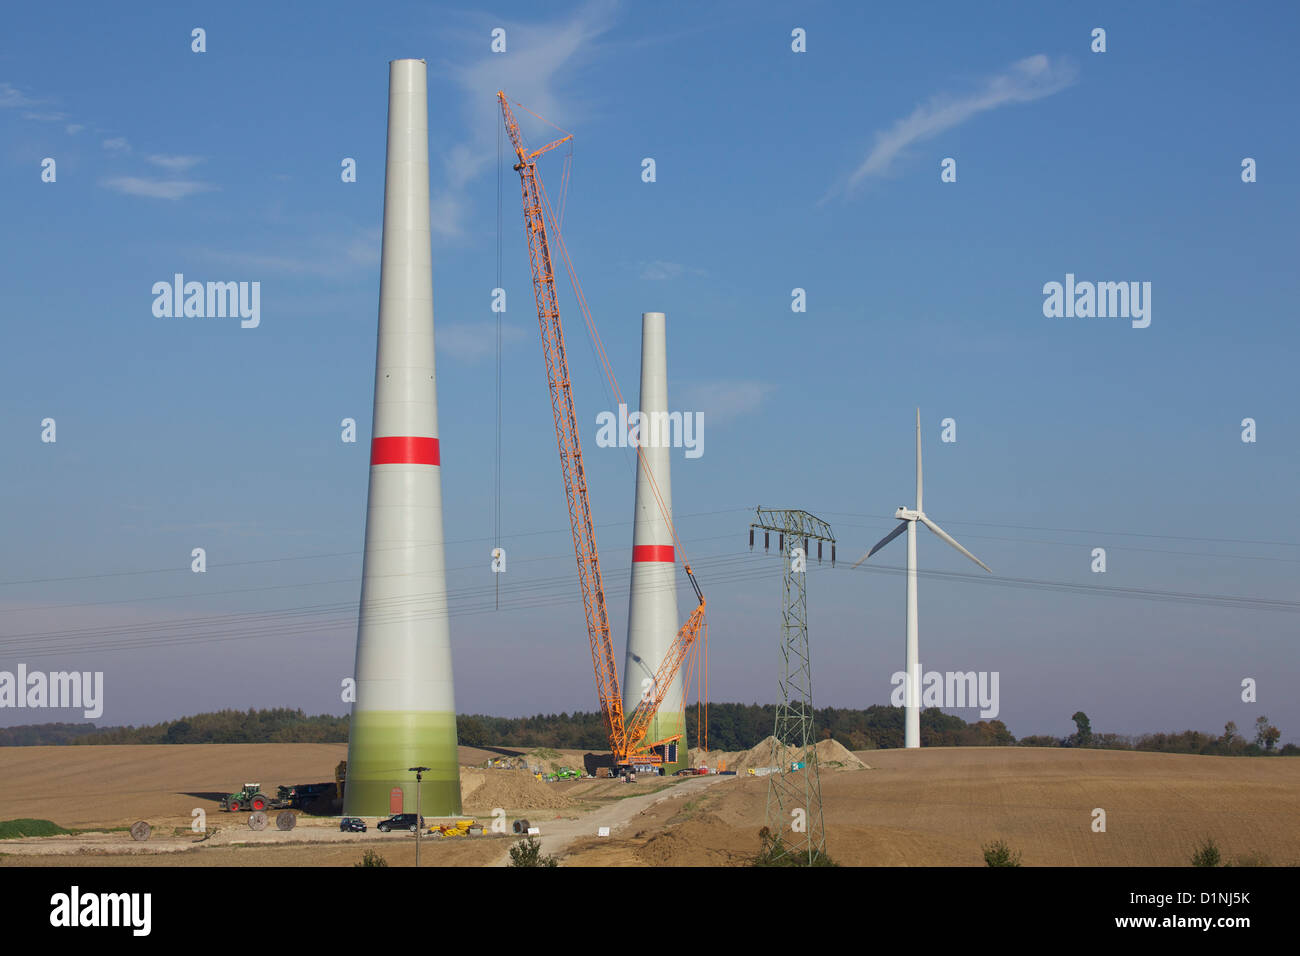 Installation of a wind power station Stock Photo